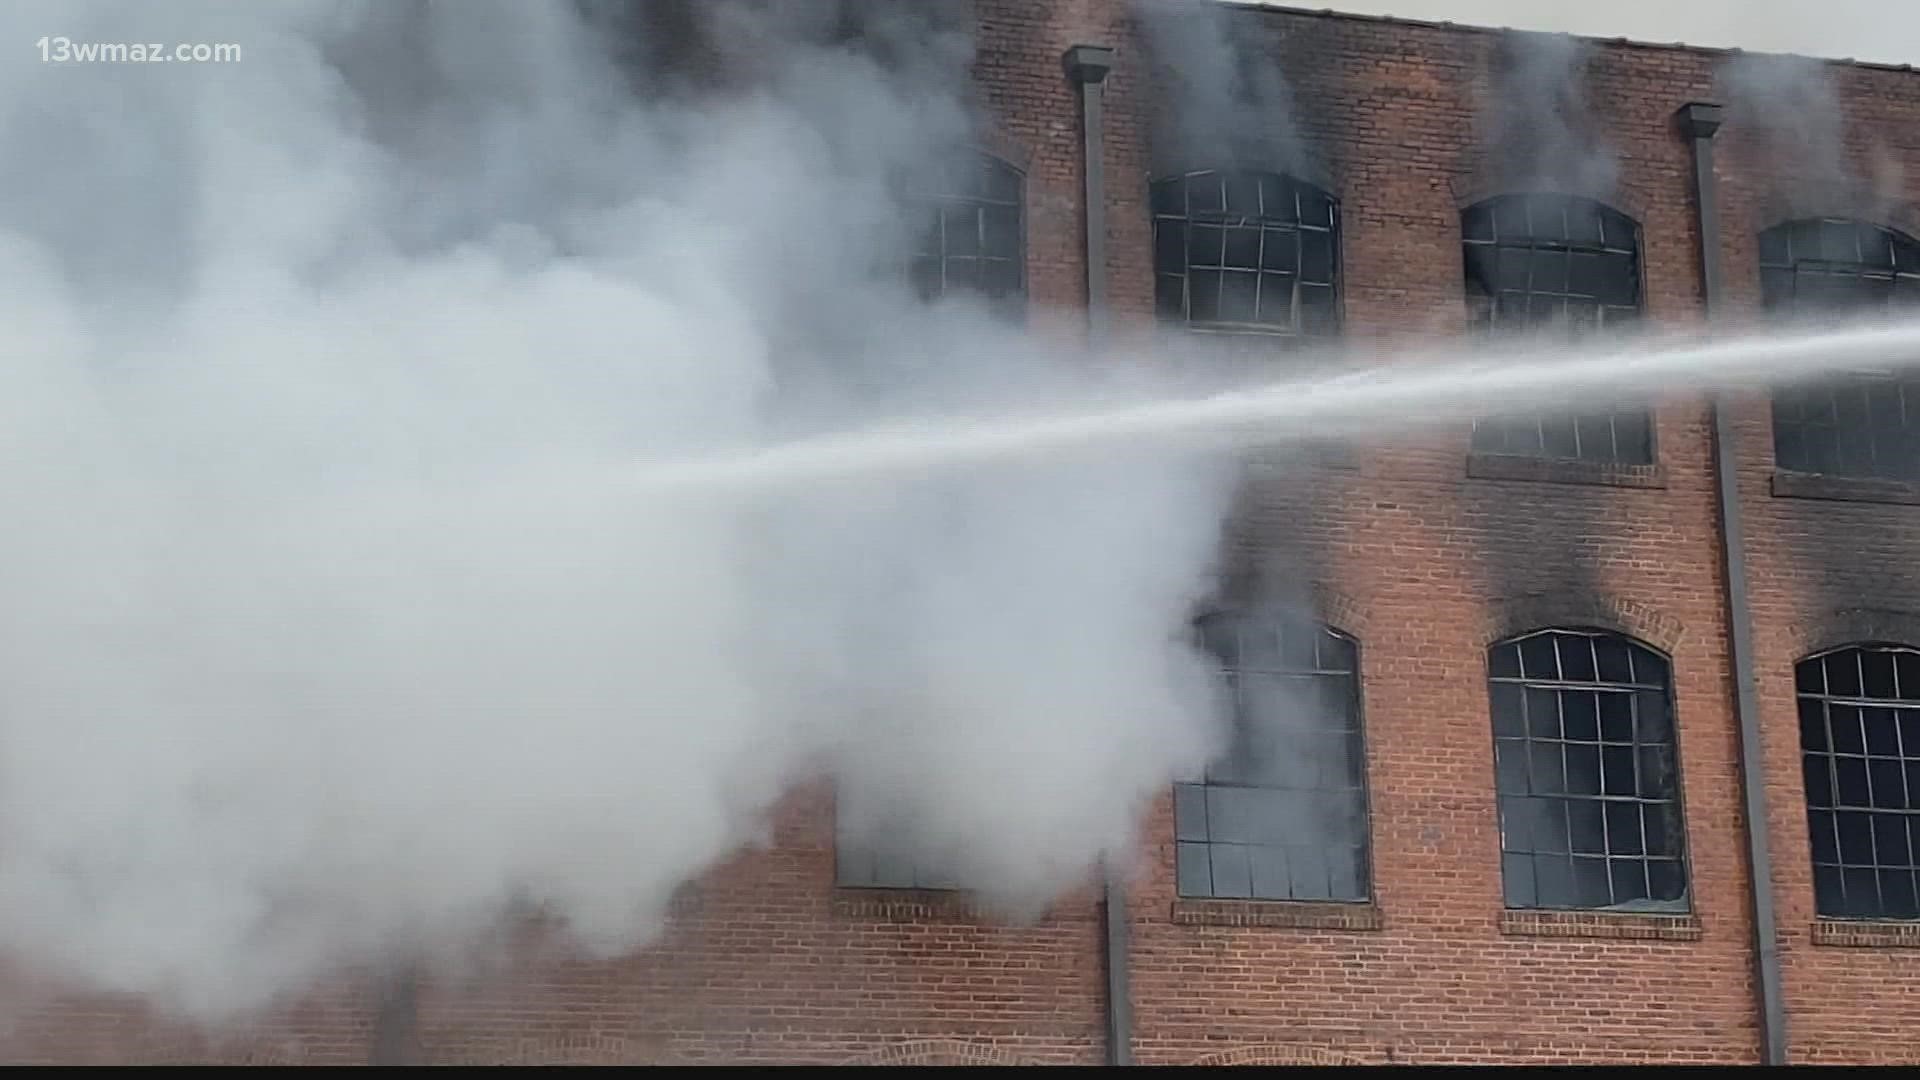 Around 10:37 a.m., Macon-Bibb Fire department responded to a fire at the building.